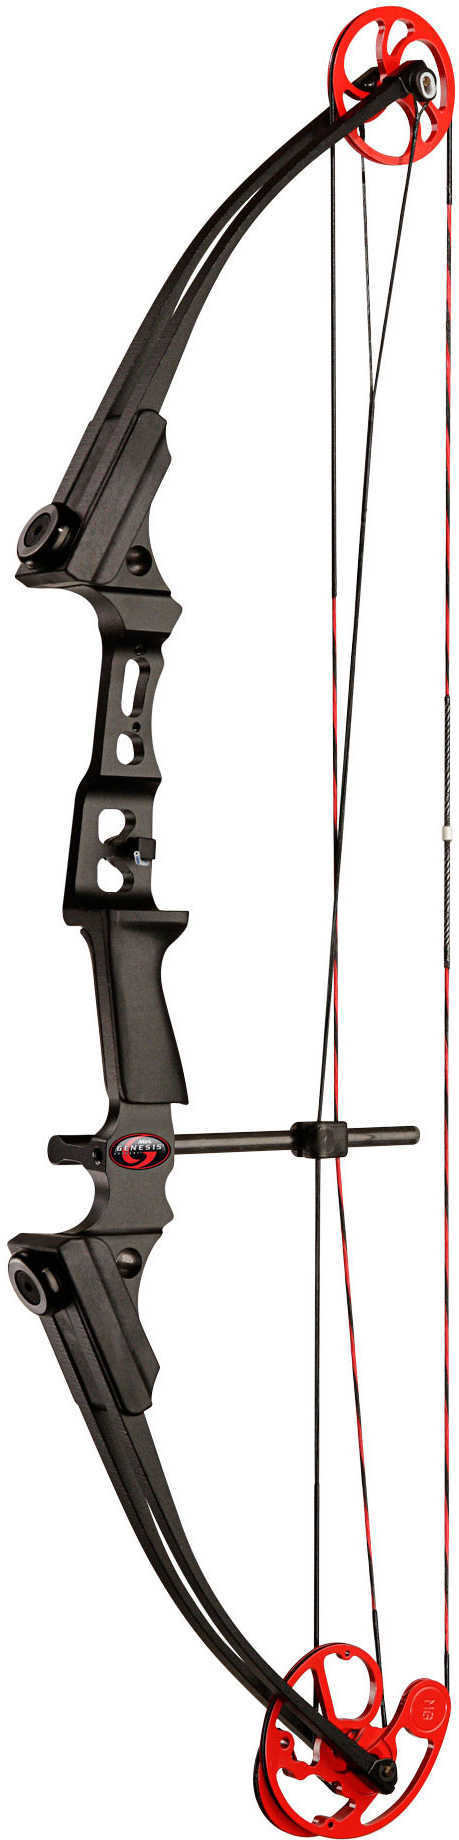 Genesis Mini Bow Right Handed Black With Red Camo, Kit 11427